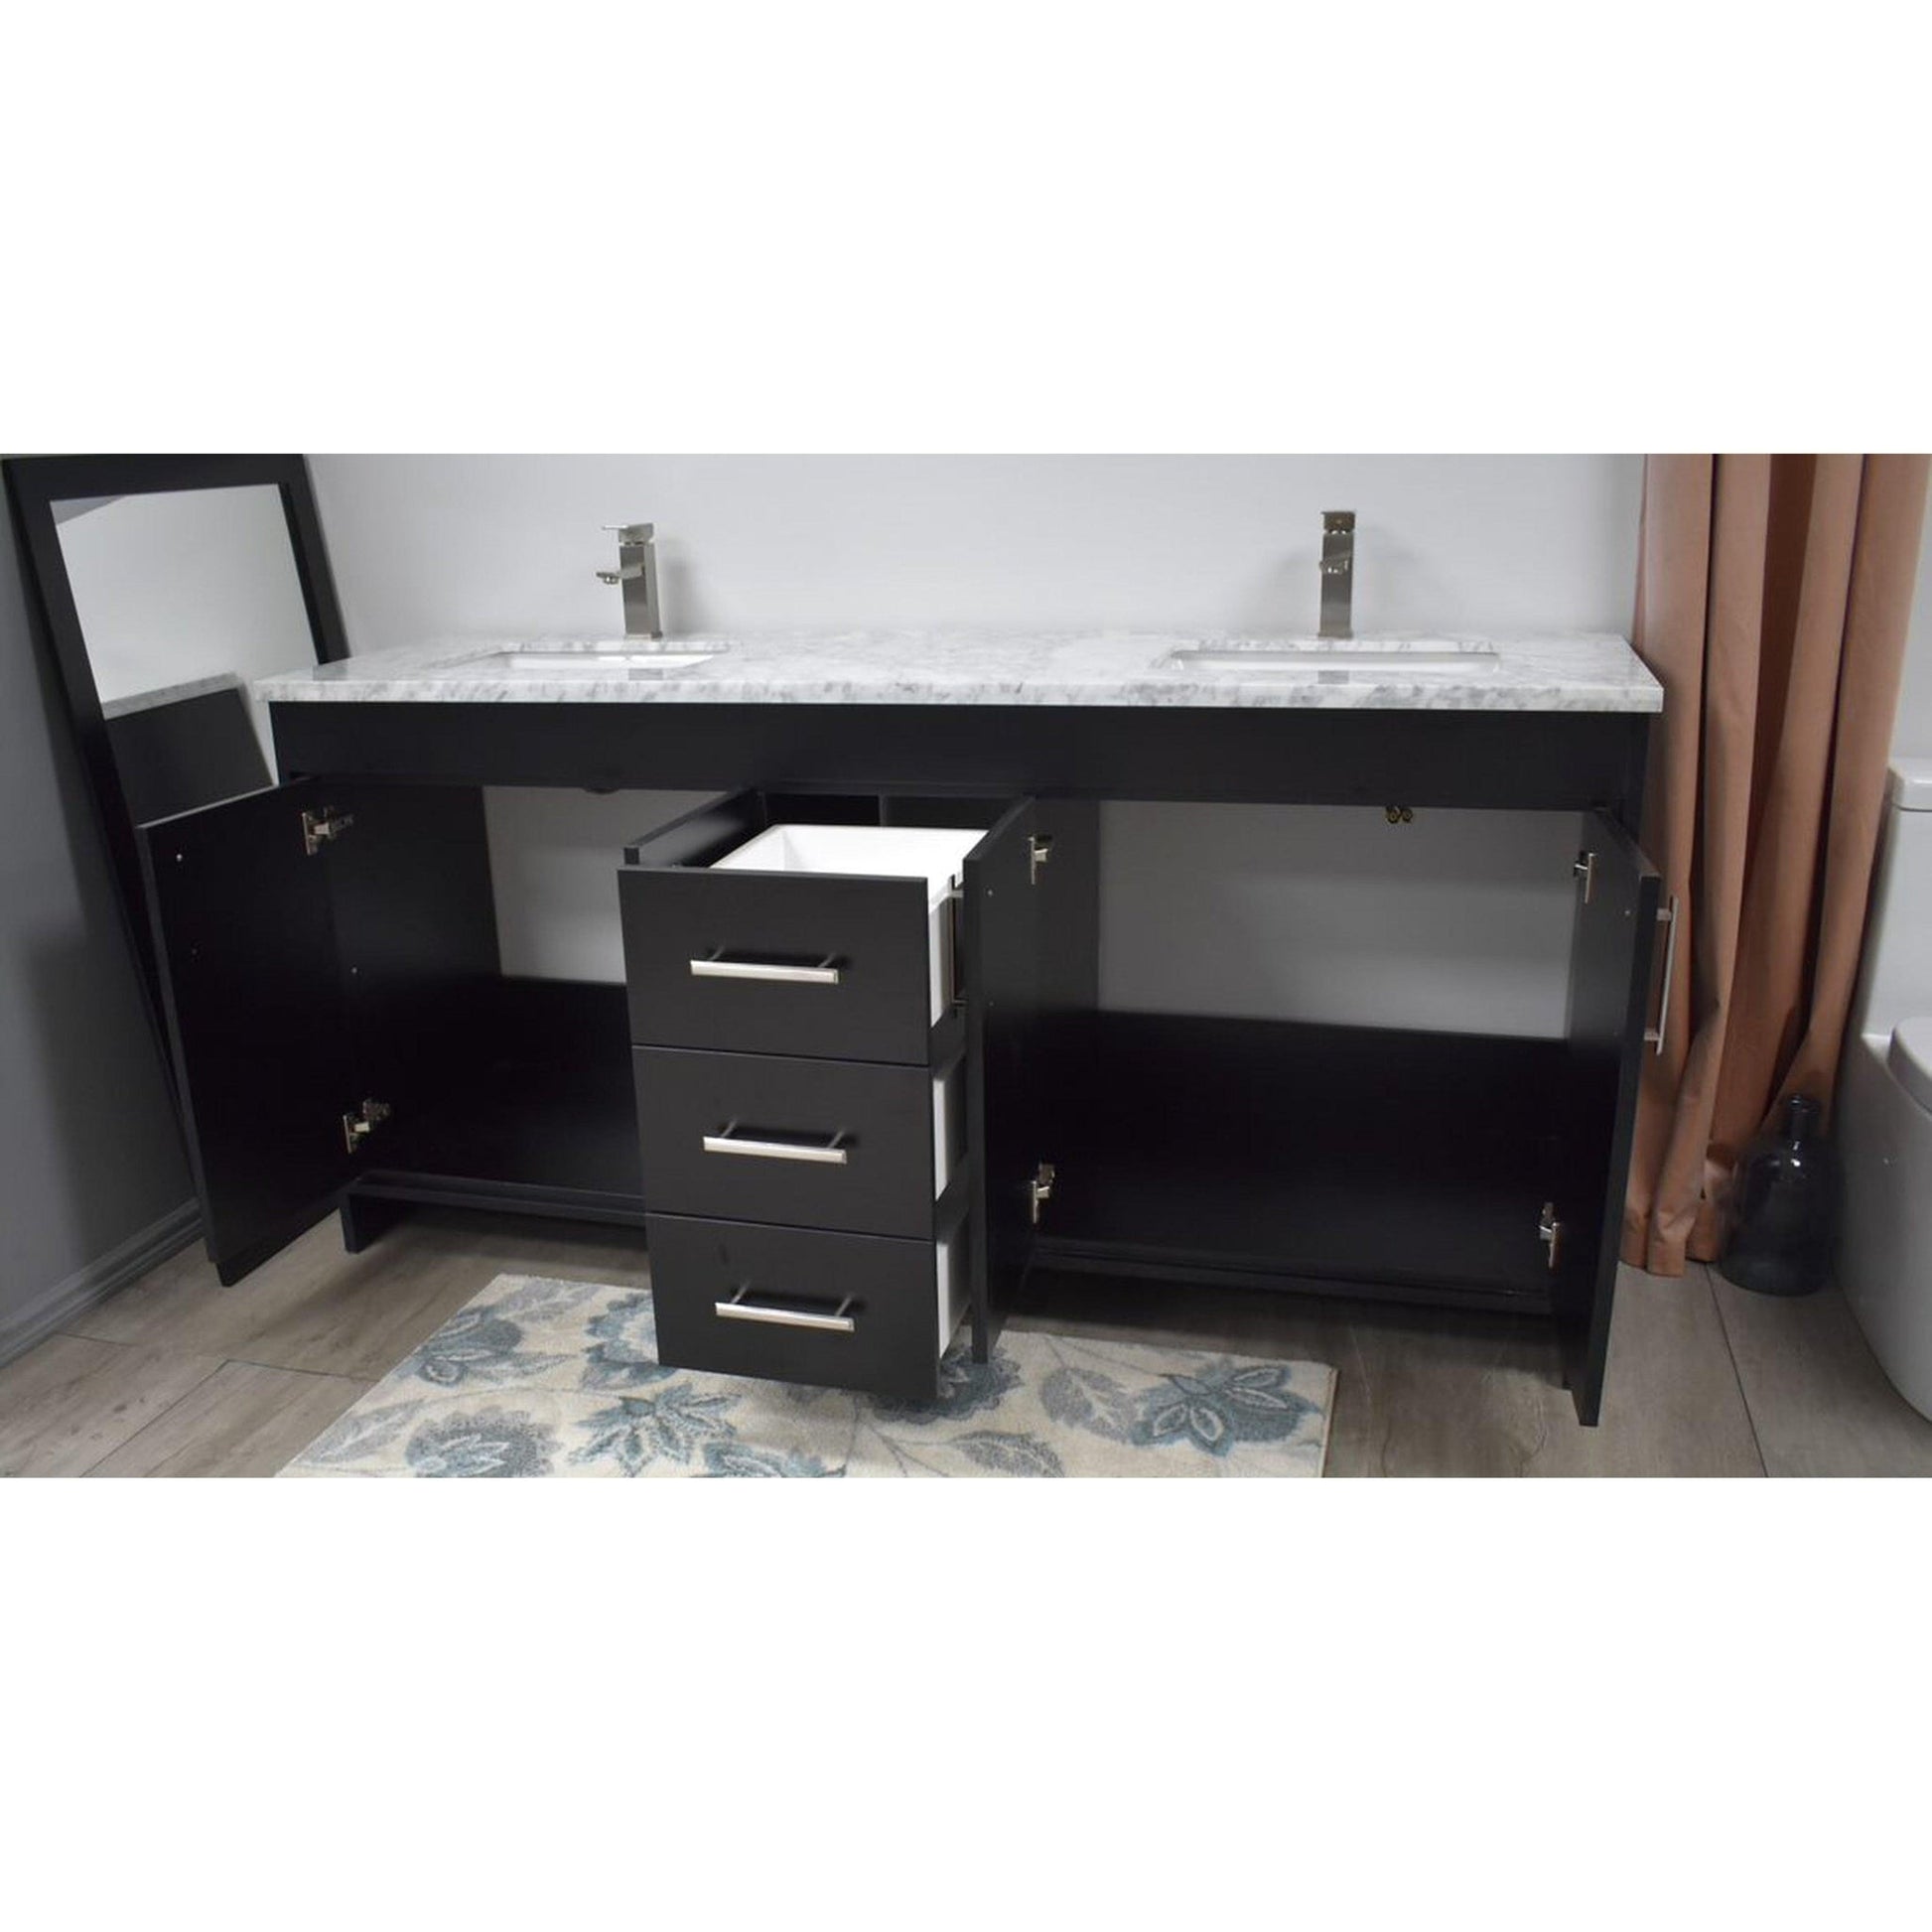 Volpa USA Capri 60" x 22" Black Freestanding Modern Bathroom Vanity With Undermount Double Sink And Carrara Marble Top With Brushed Nickel Edge Handles